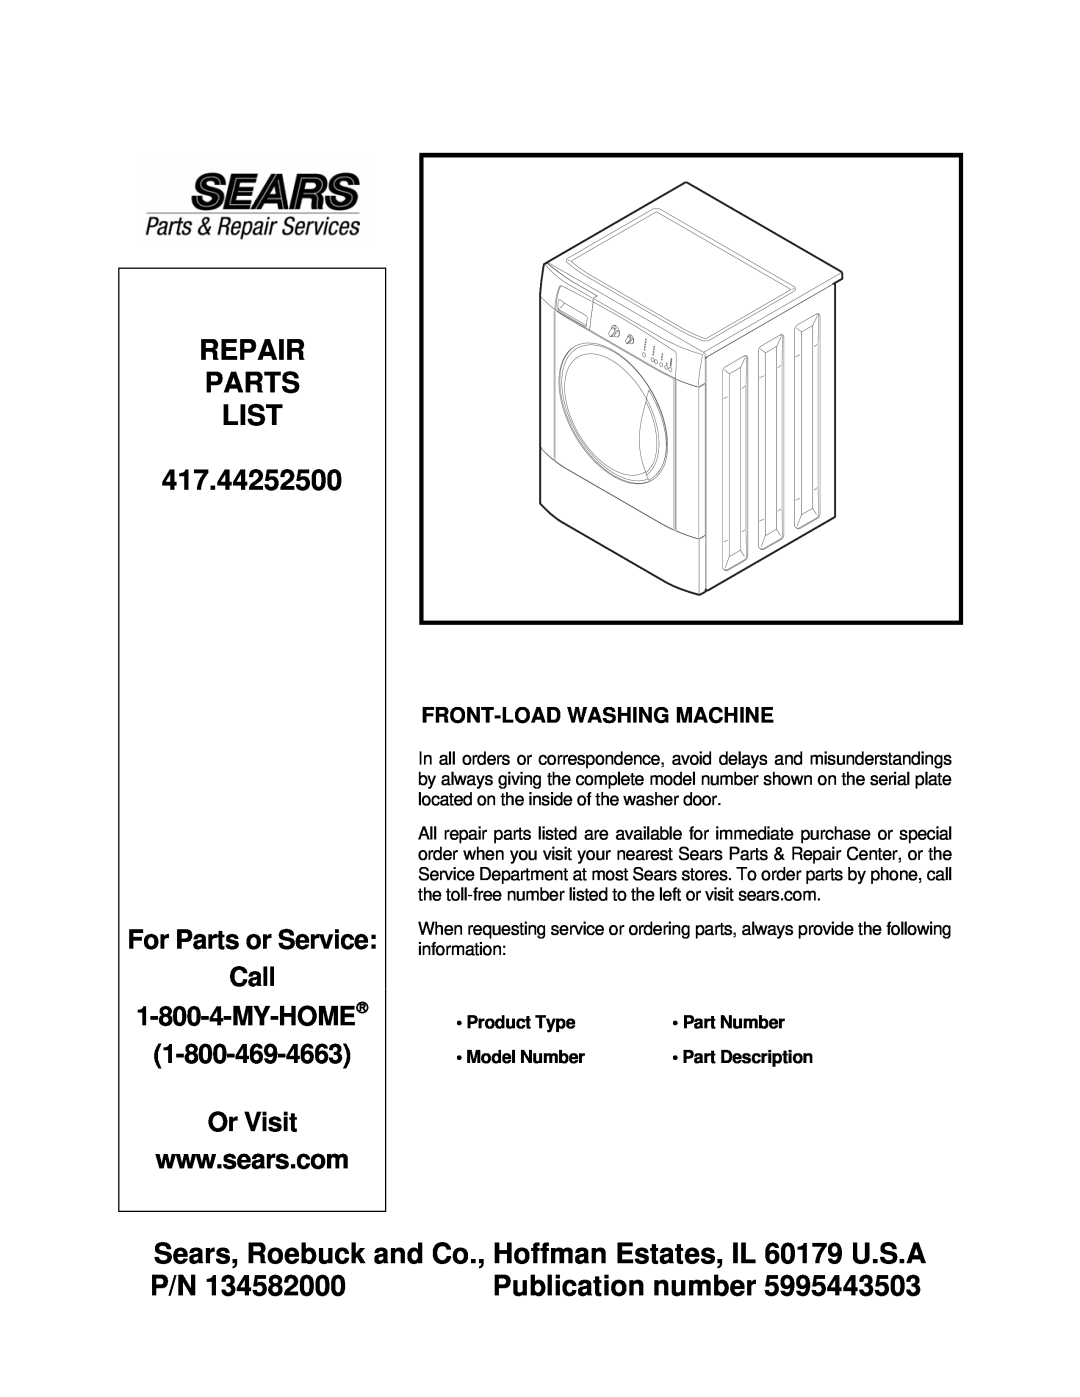 Sears 134542000 manual REPAIR PARTS LIST 417.44252500, Sears, Roebuck and Co., Hoffman Estates, IL 60179 U.S.A, Or Visit 